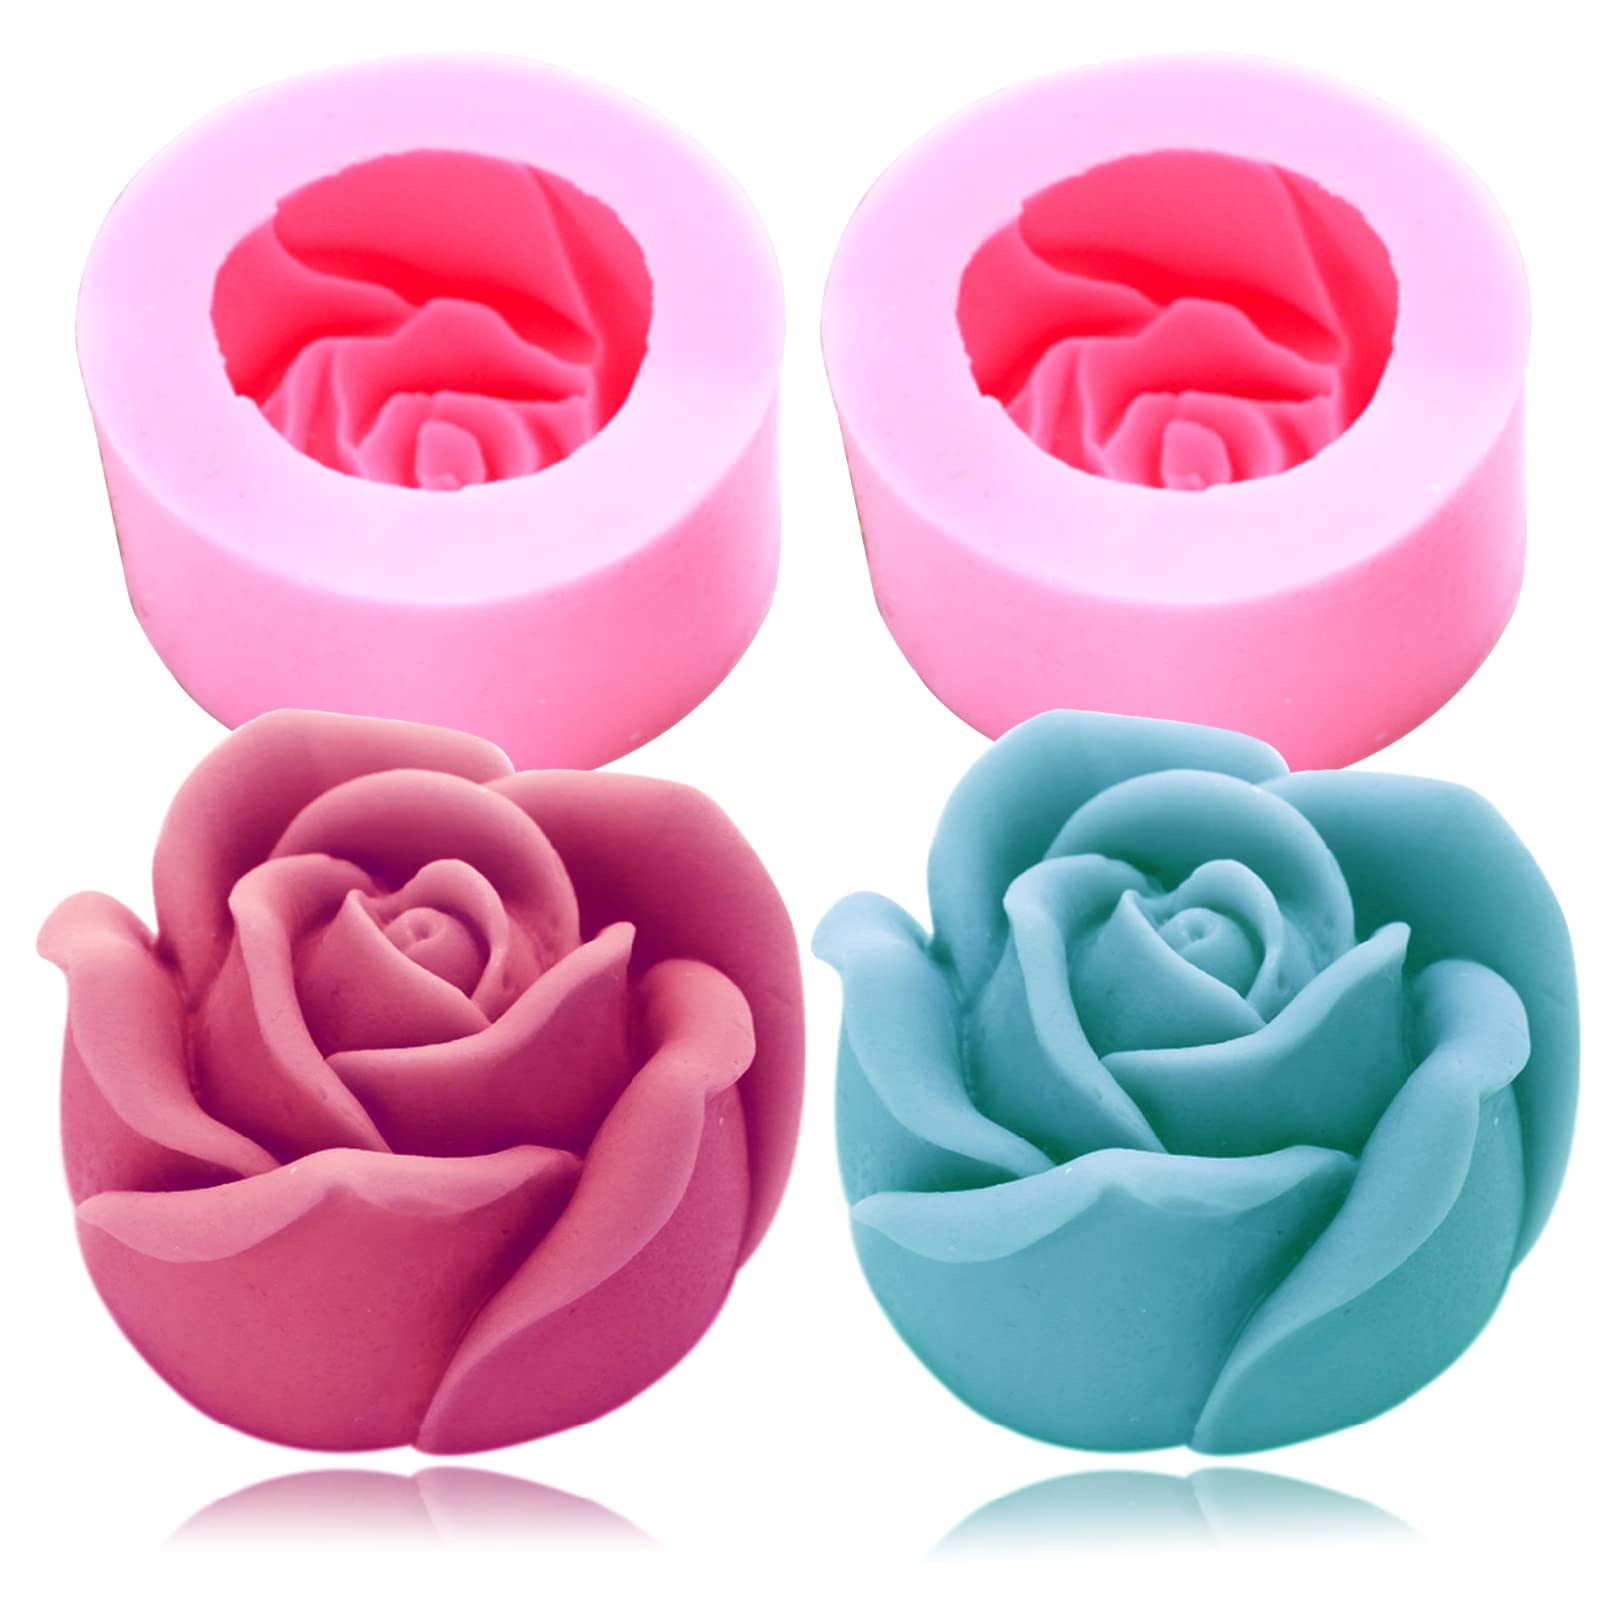 Fewo 2 Pack 3D Rose Candle Molds Cylinder and Sphere Shape Rose Flower  Silicone Molds for Making DIY Homemade Beeswax Candles Bath Bomb Mini Soap